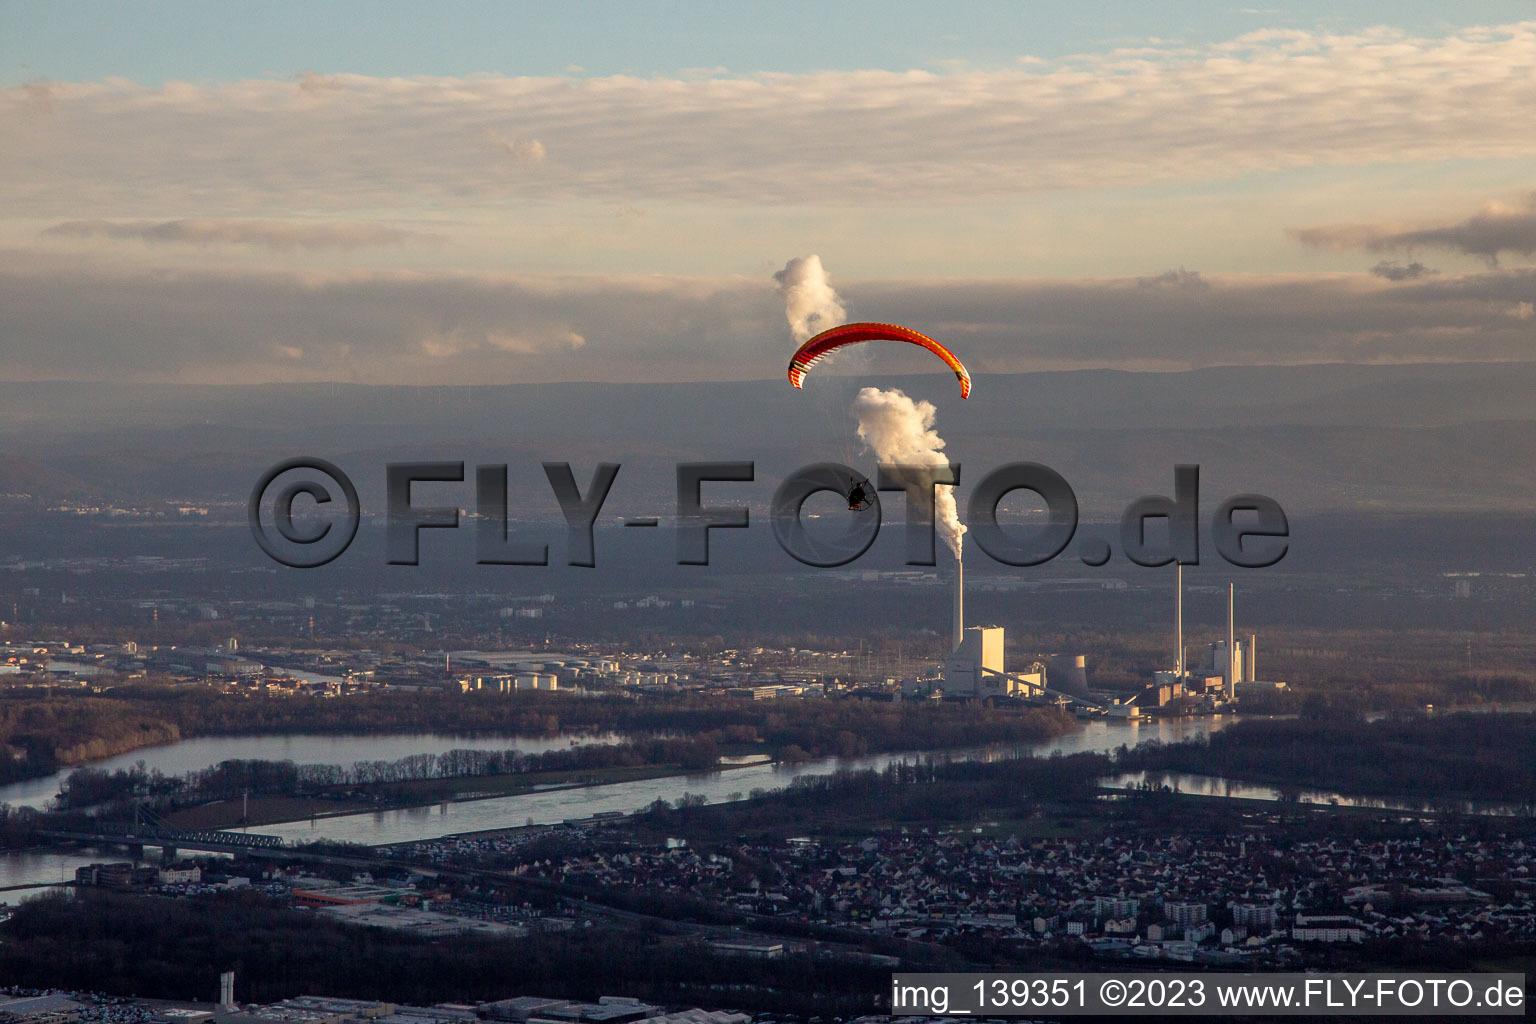 Paraglider over Maximiliansau in the district Maximiliansau in Wörth am Rhein in the state Rhineland-Palatinate, Germany